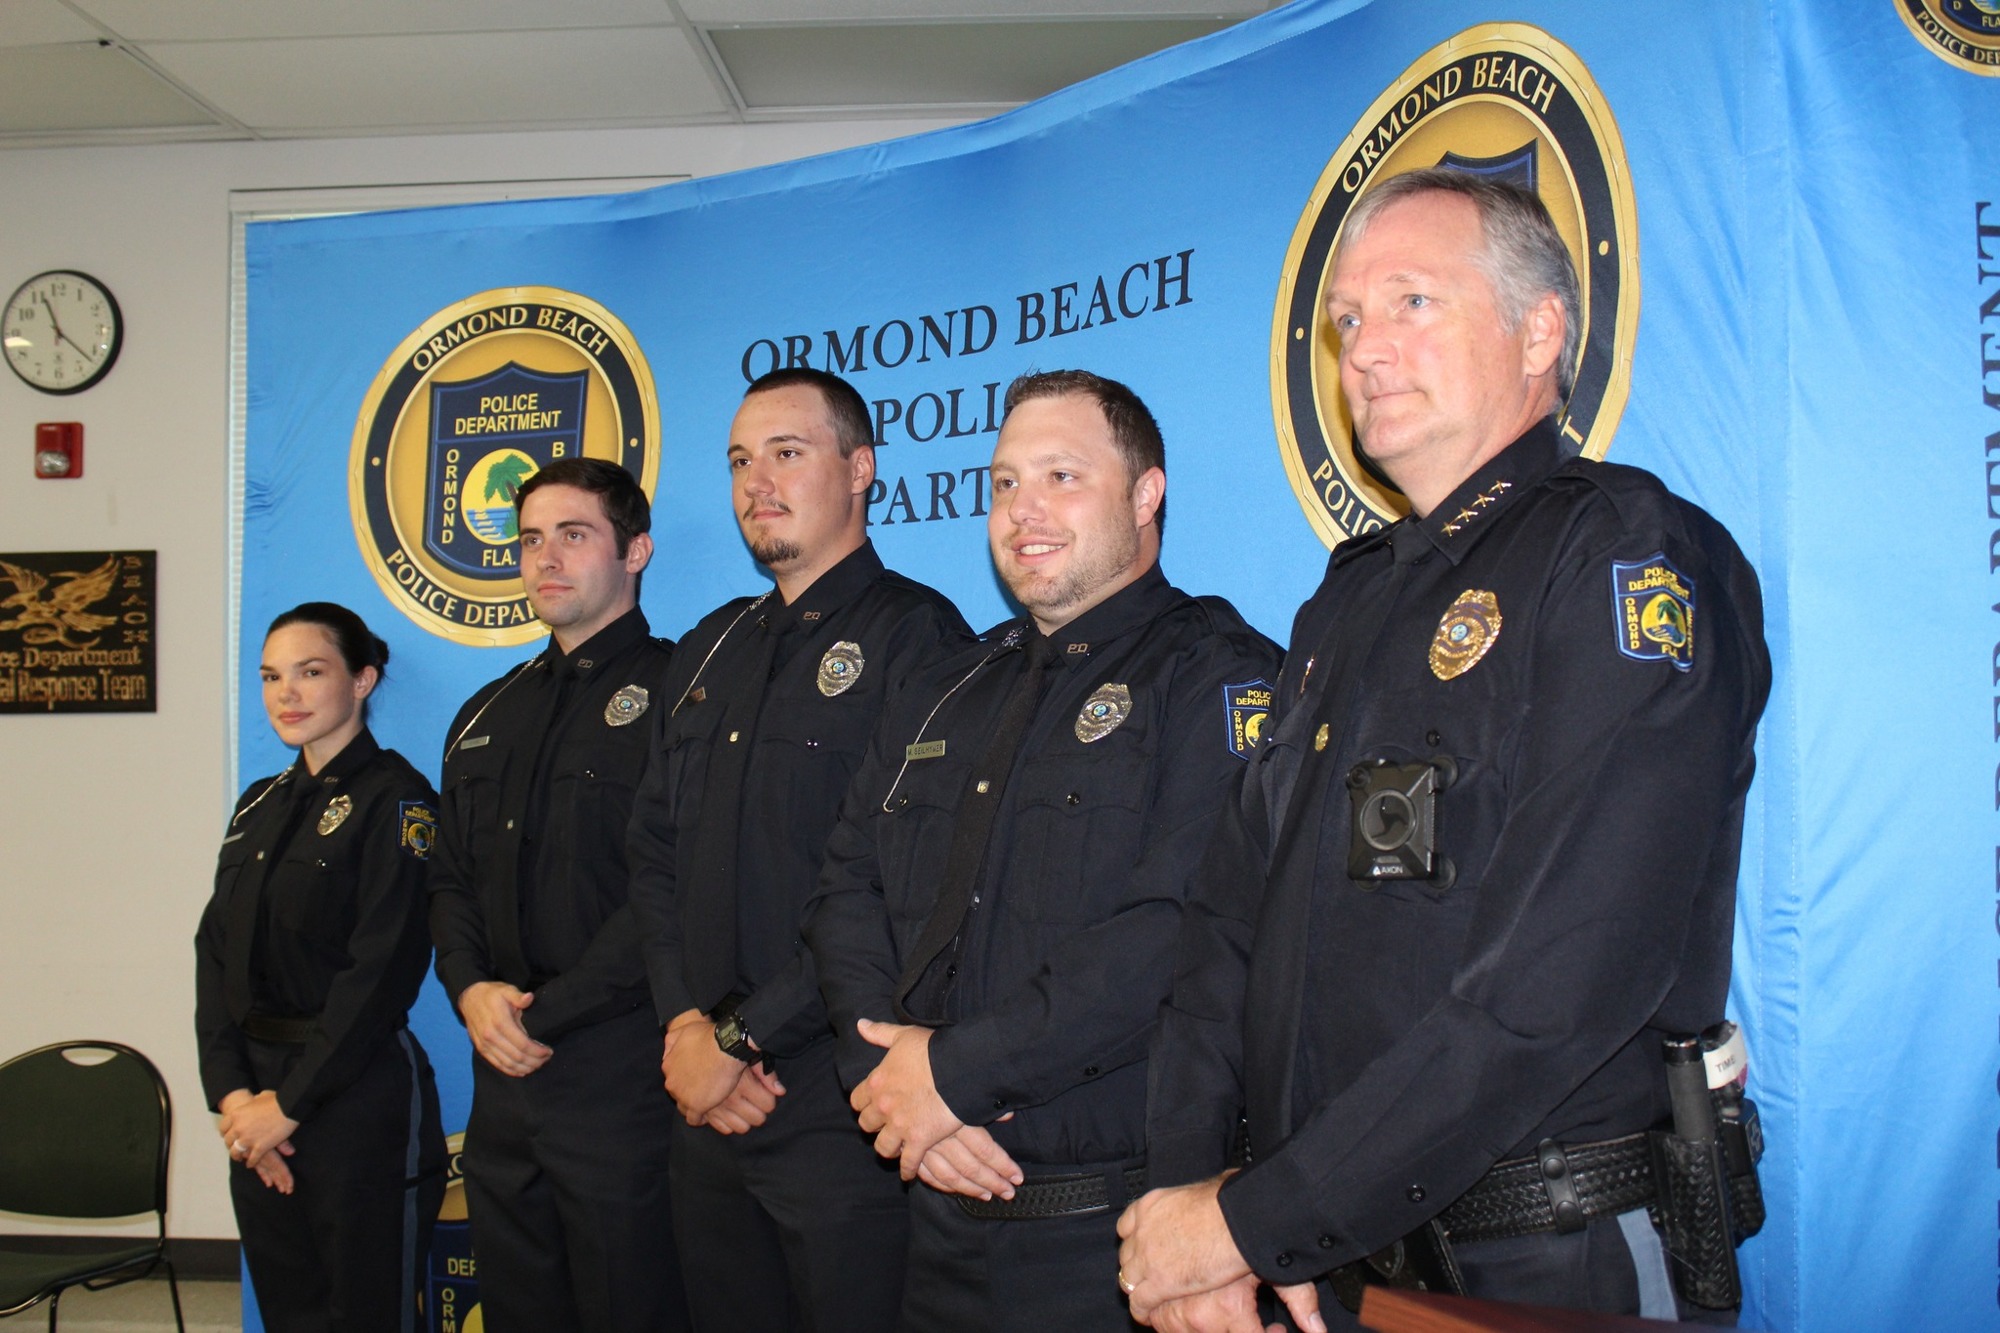 Officer Brittany Baldwin, Officer David Burnett, Officer Anthony Lafleur, Officer Michael Seilhymer and Ormond Beach Police Chief Jesse Godfrey. Photo courtesy of OBPD's Facebook page.